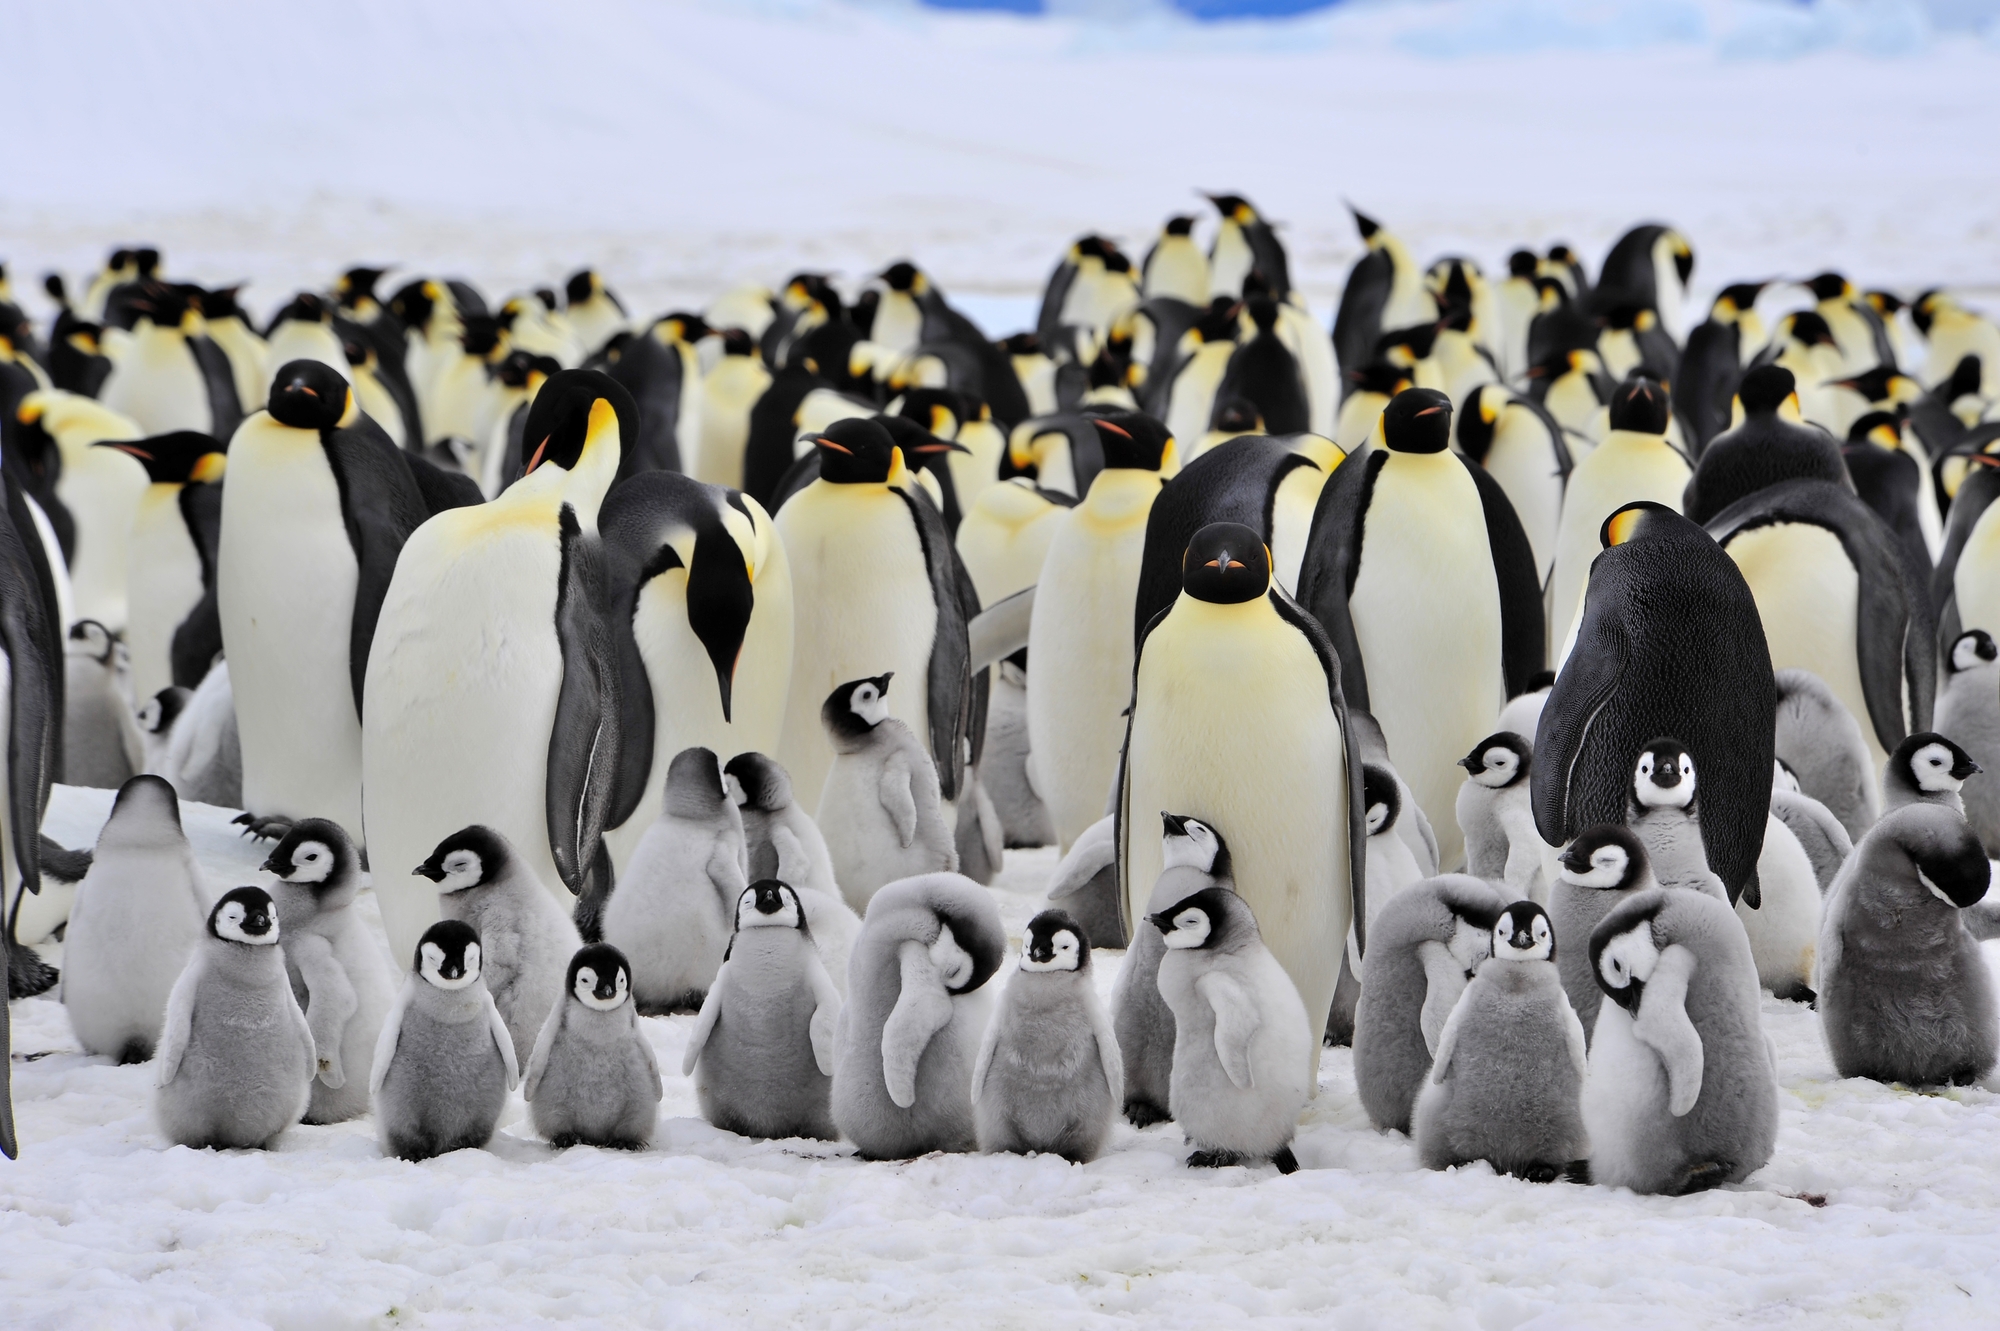 Most male Emperor penguins fast for 115 days—but a few of them may sneak snacks